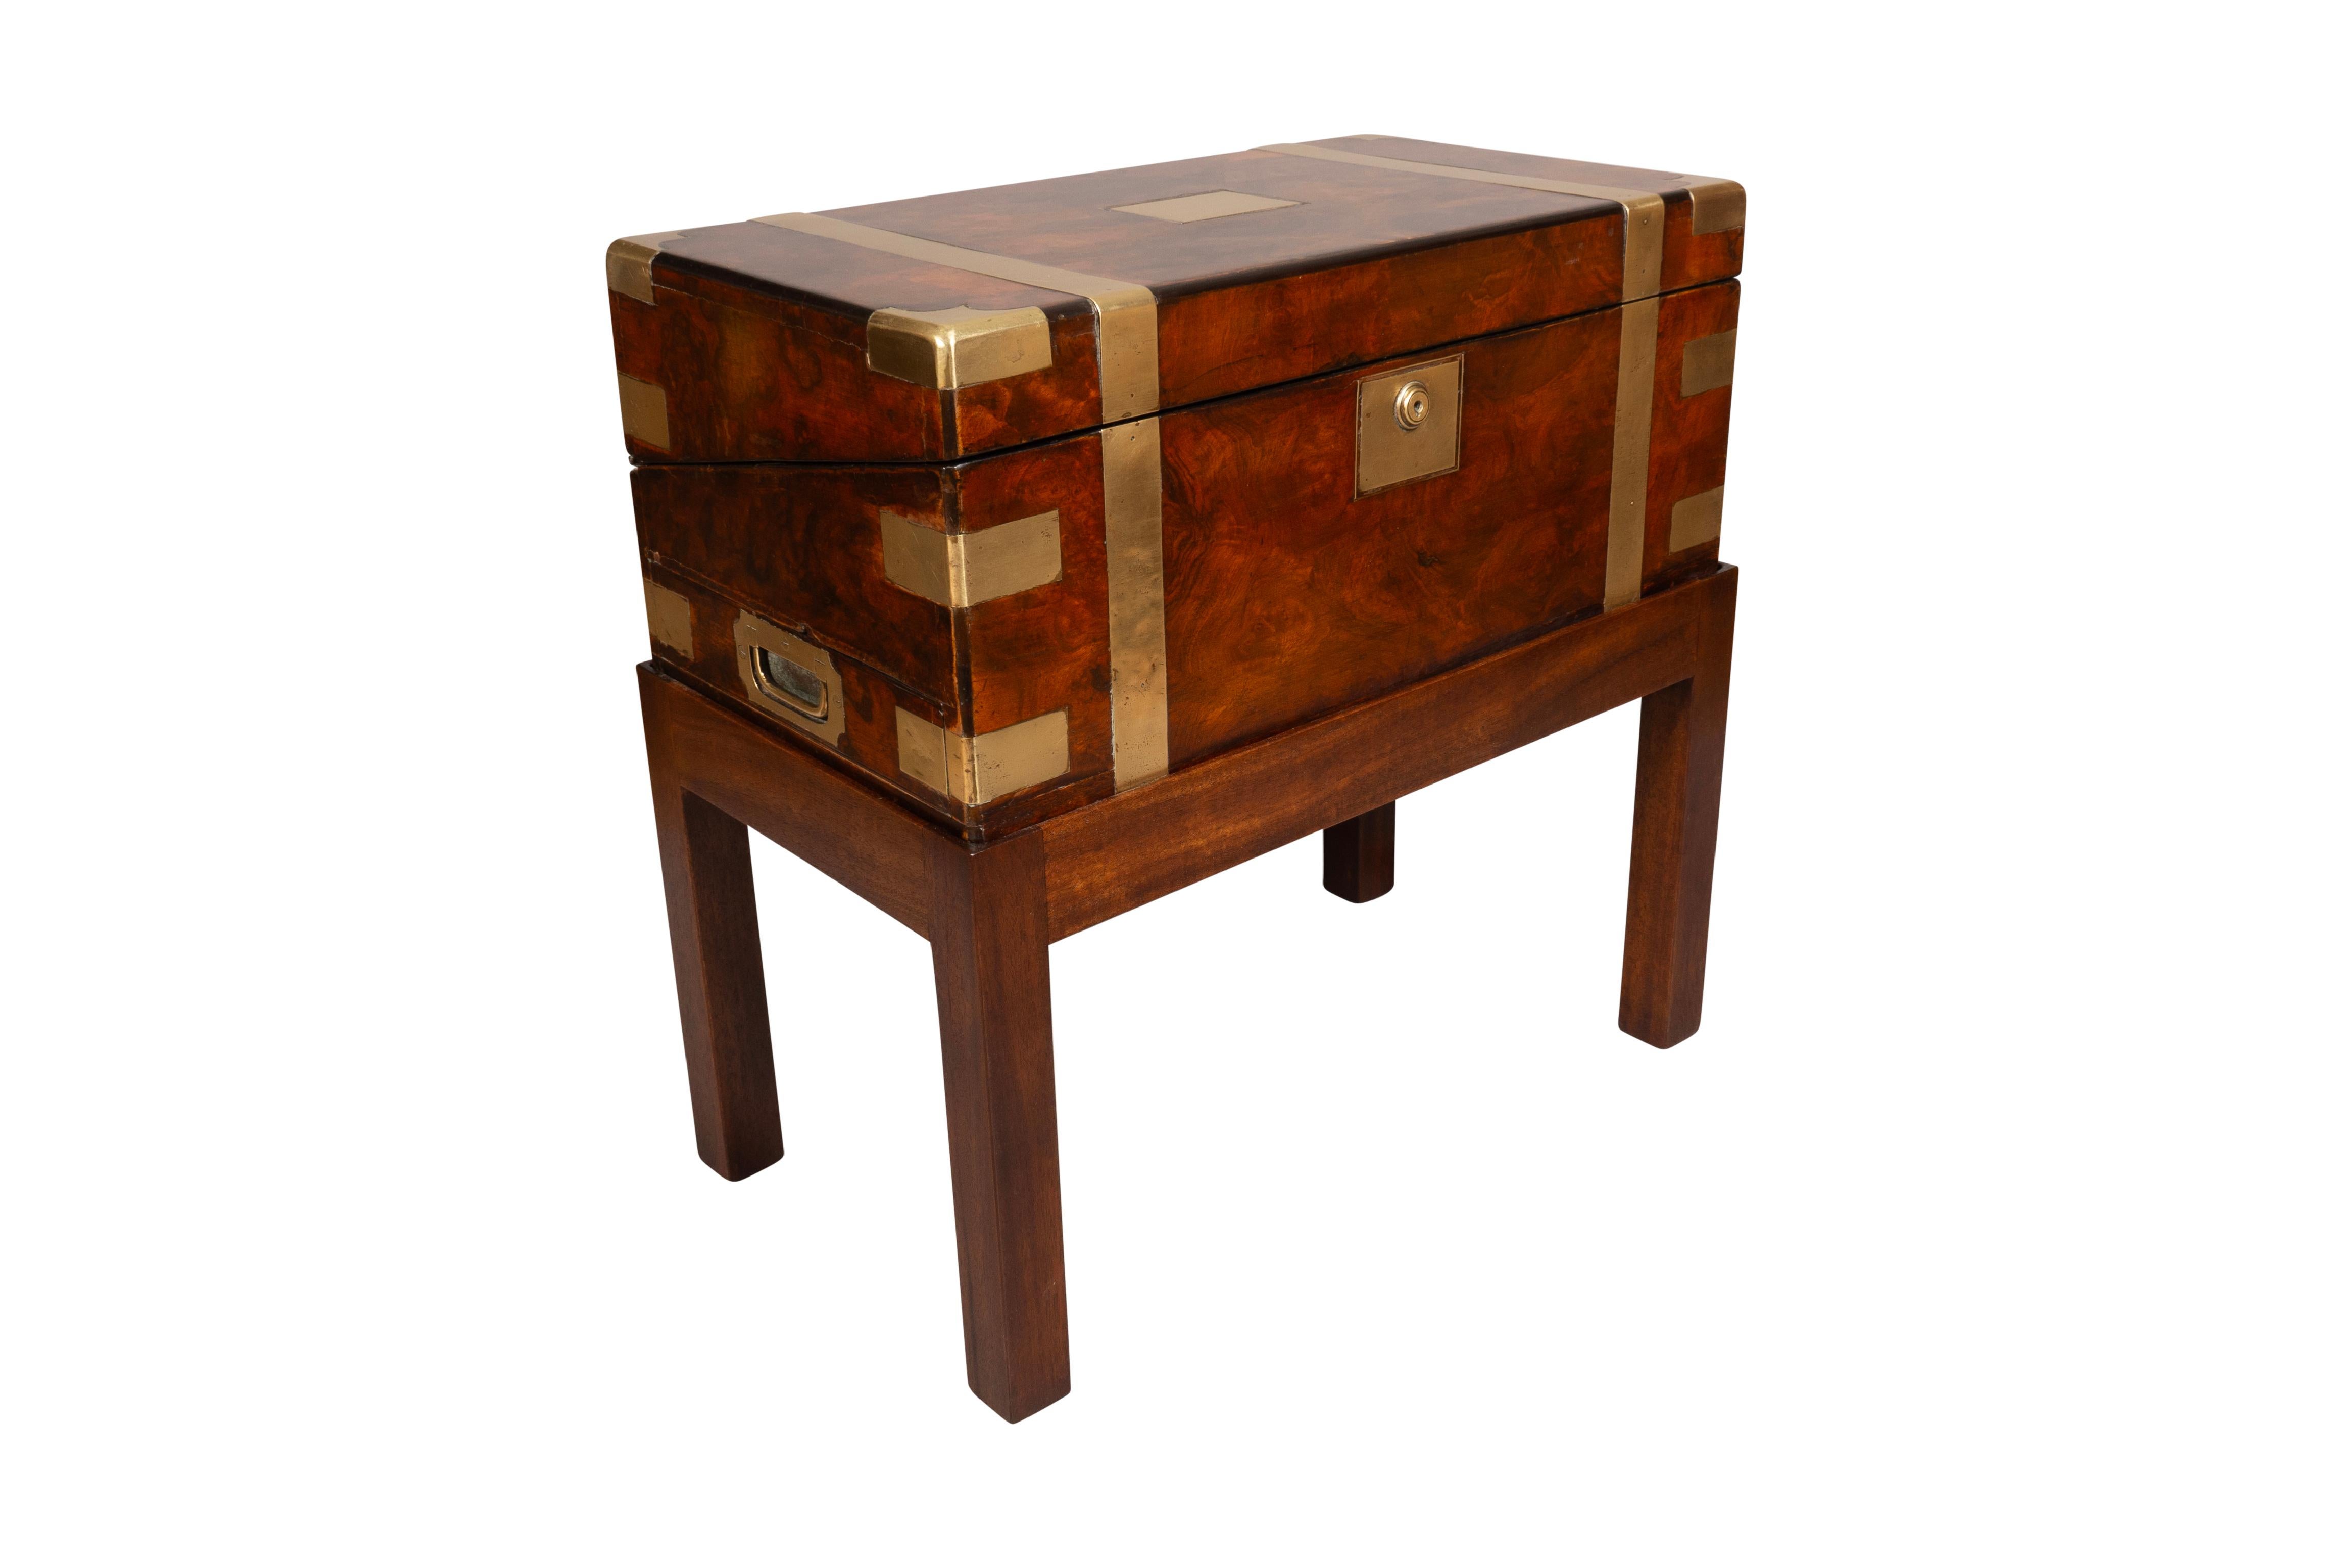 The box originally a traveling desk with green leather desk section and fitted compartments. Burl walnut case with brass strapping. Key included. Later mahogany base.
Makes a nice side table.